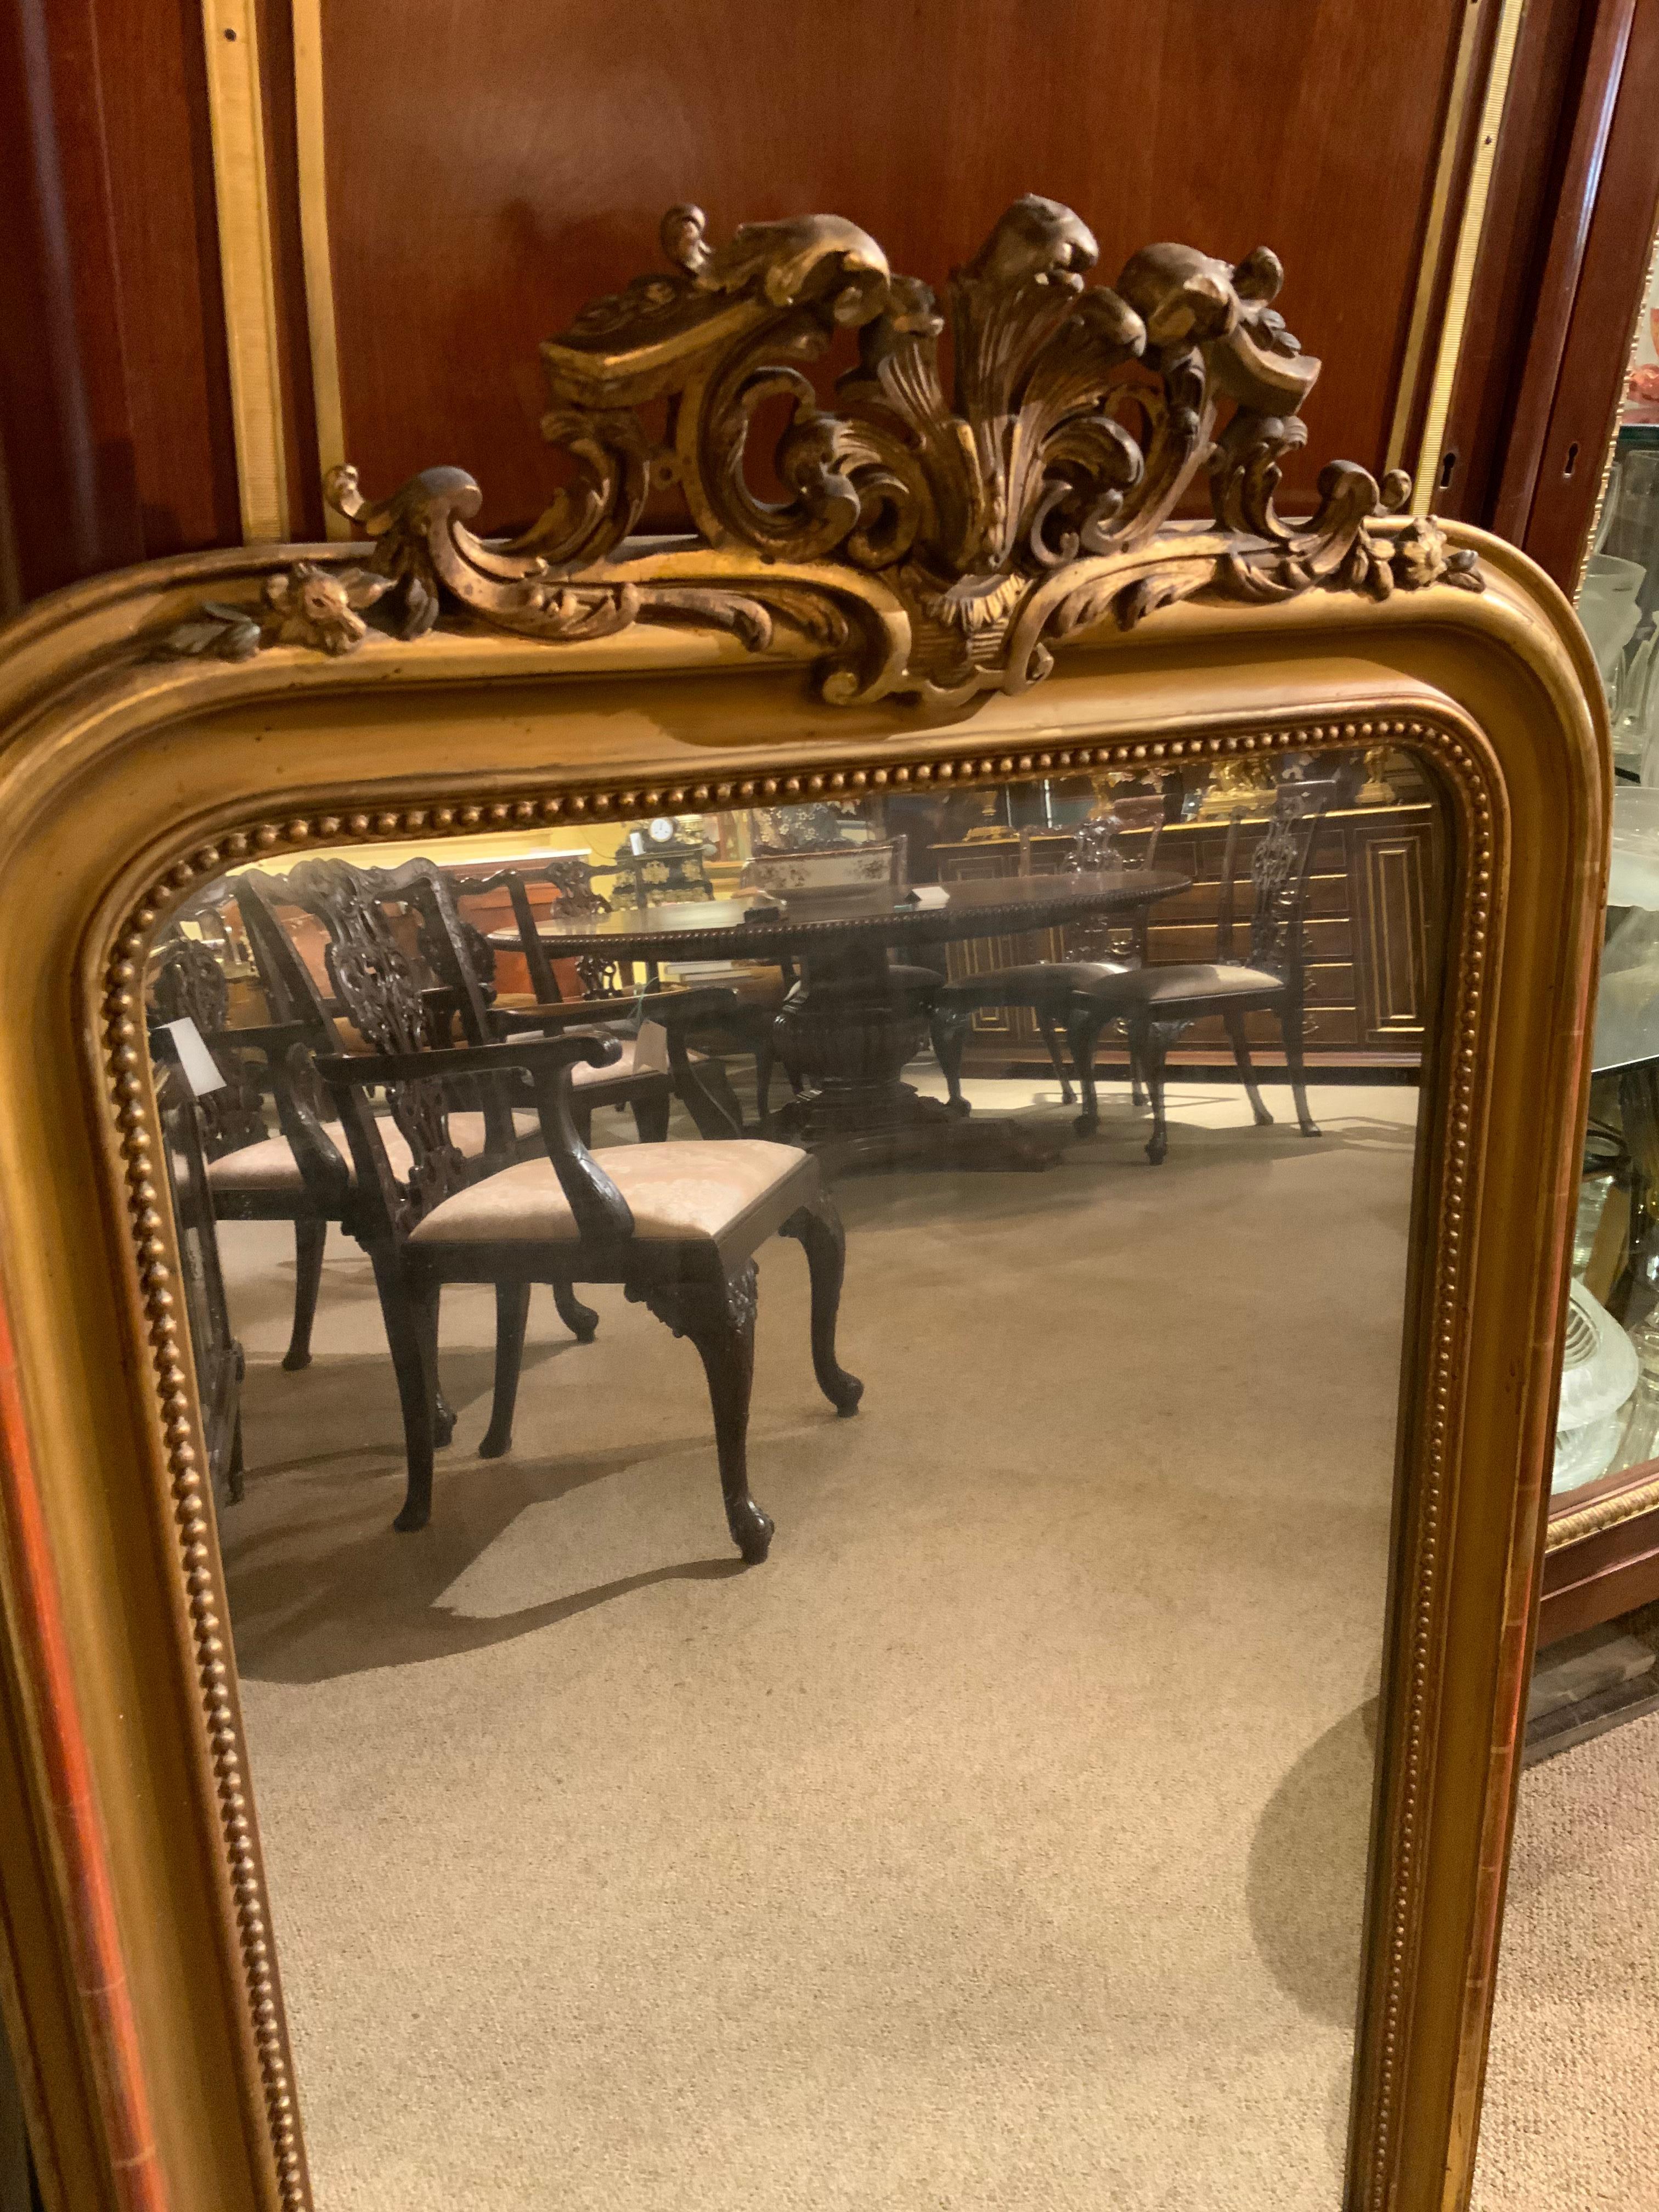 This antique piece has the original mirror and does not have spots.
The frame in giltwood is also original and has a beautifully aged
Patina showing elegant wear with some of the red under glow
Showing. The oval at the crest is very graceful and